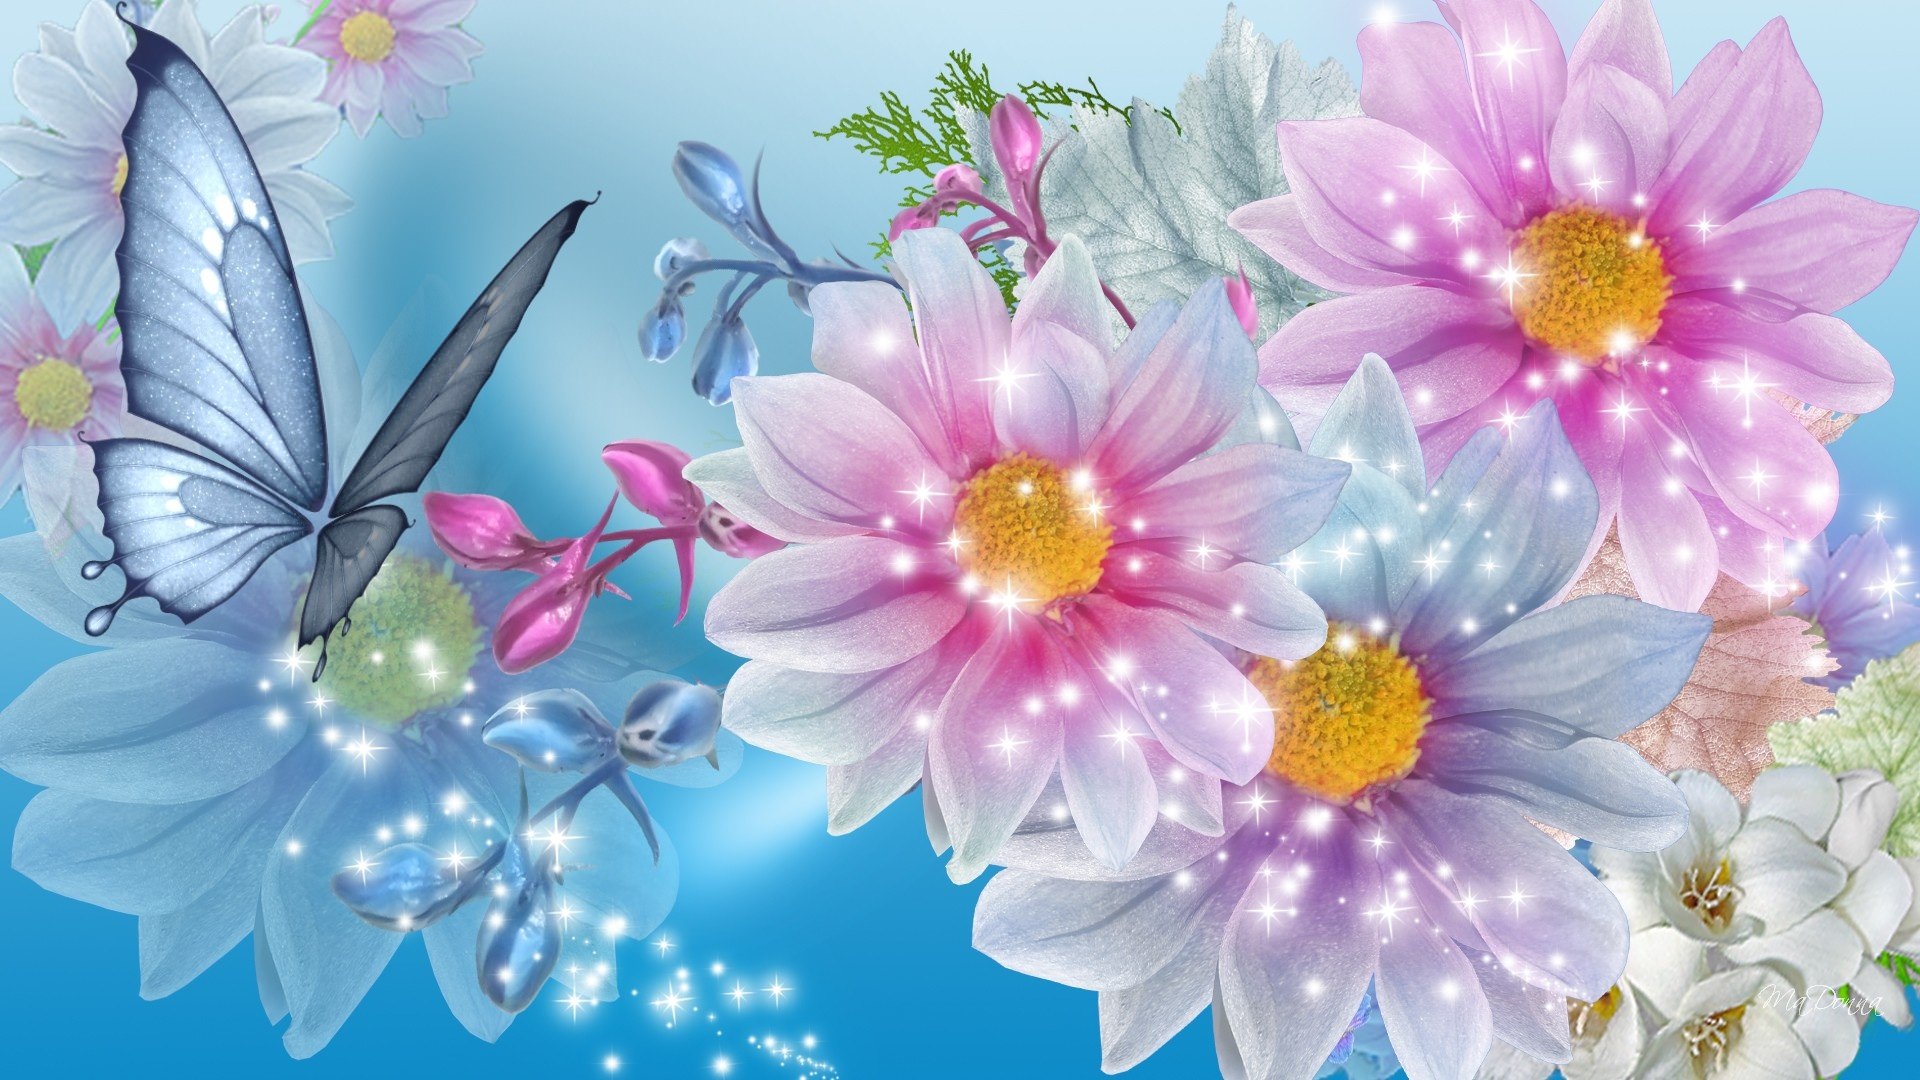 169 Flower Backgrounds Wallpapers Pictures Images Design